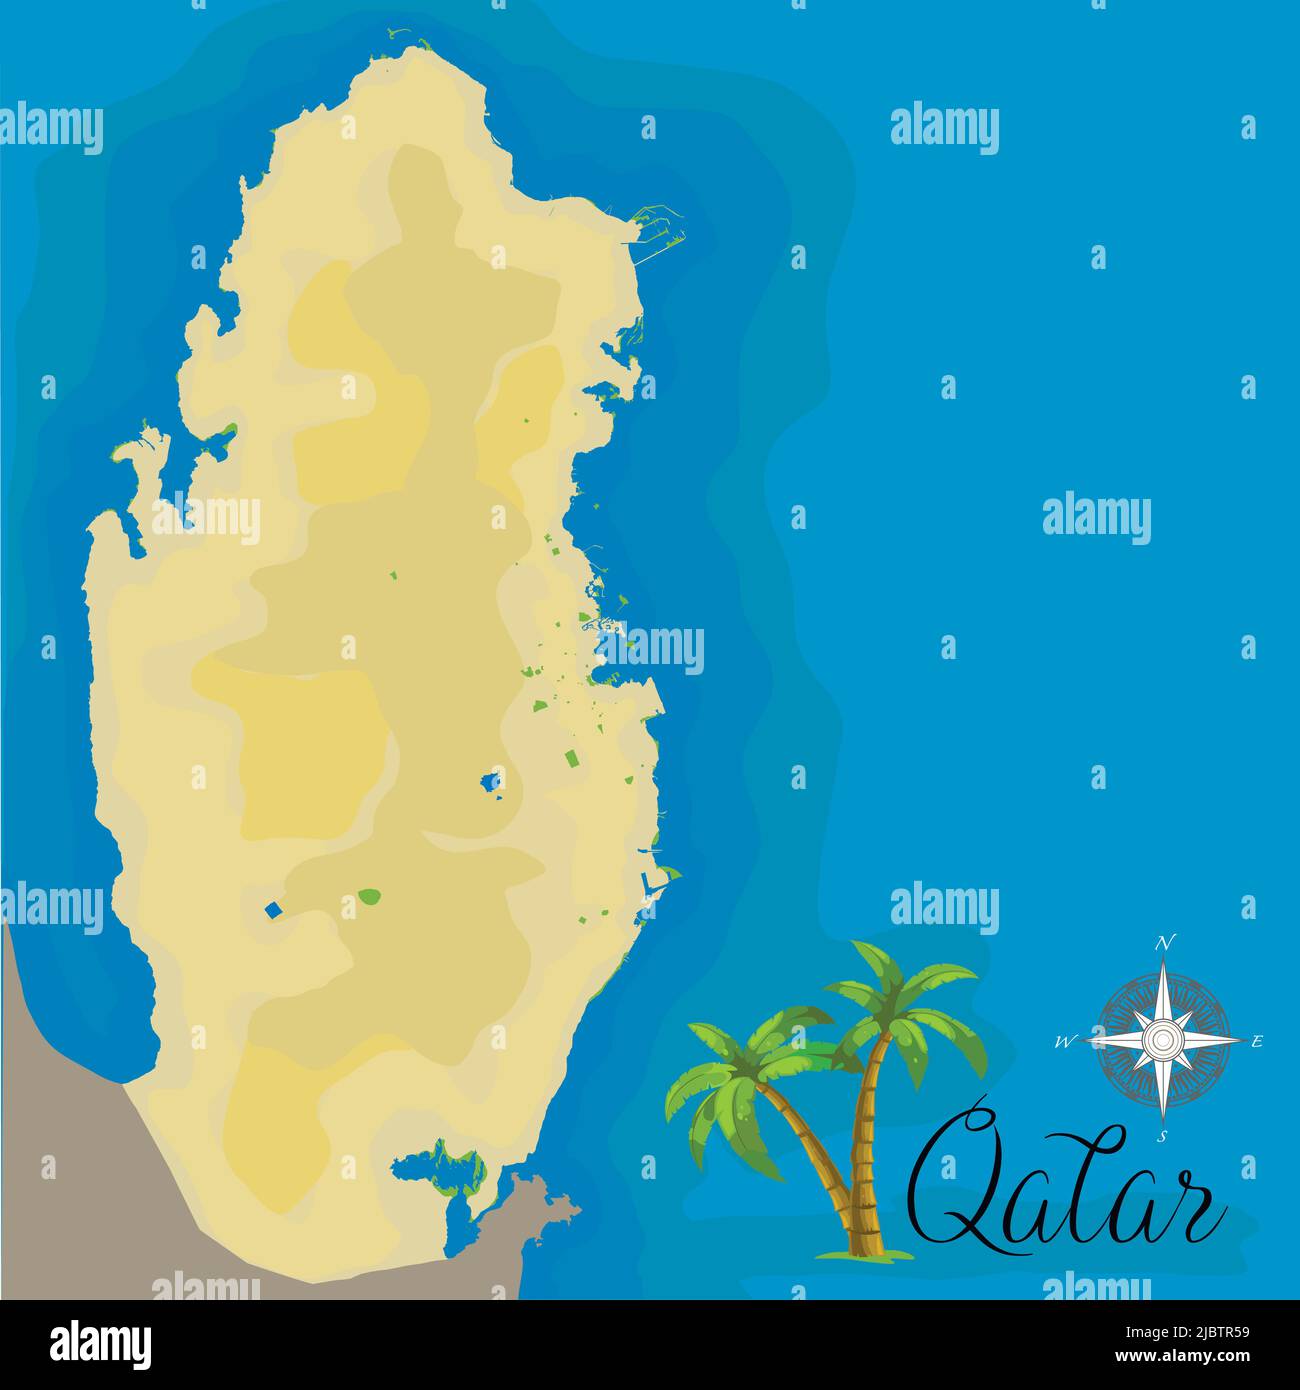 Qatar. Realistic satellite background. Drawn with cartographic accuracy. A bird's-eye view. Stock Vector